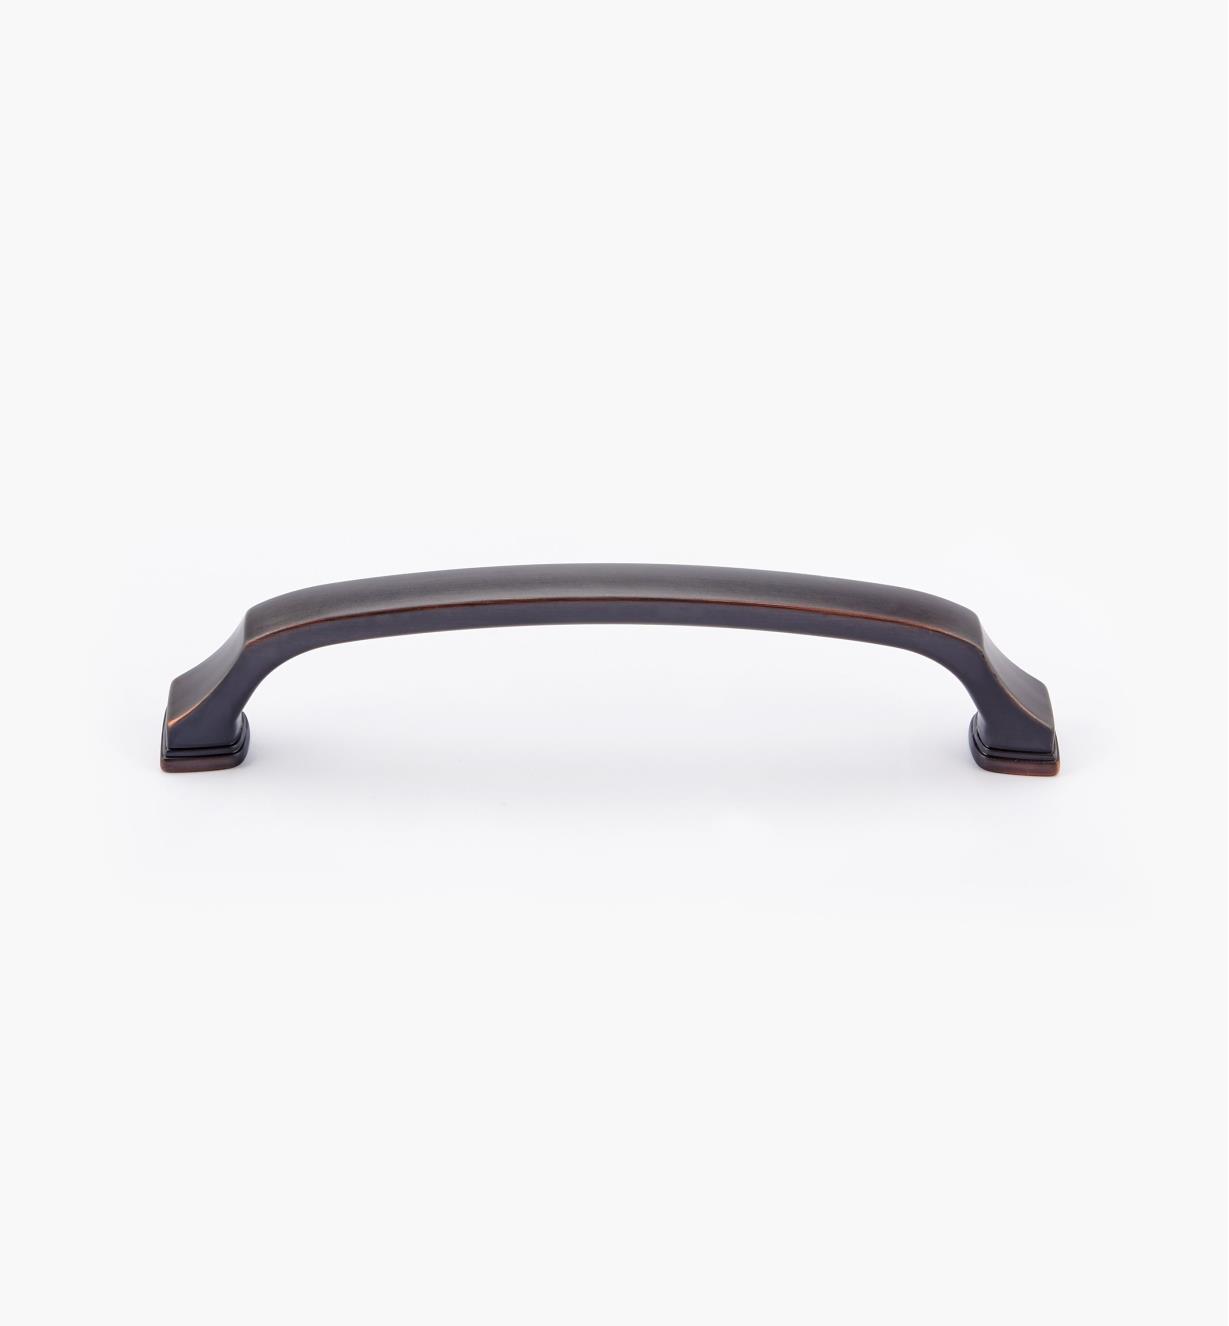 02A2246 - Revitalize ORB 160mm x 40mm Handle, each